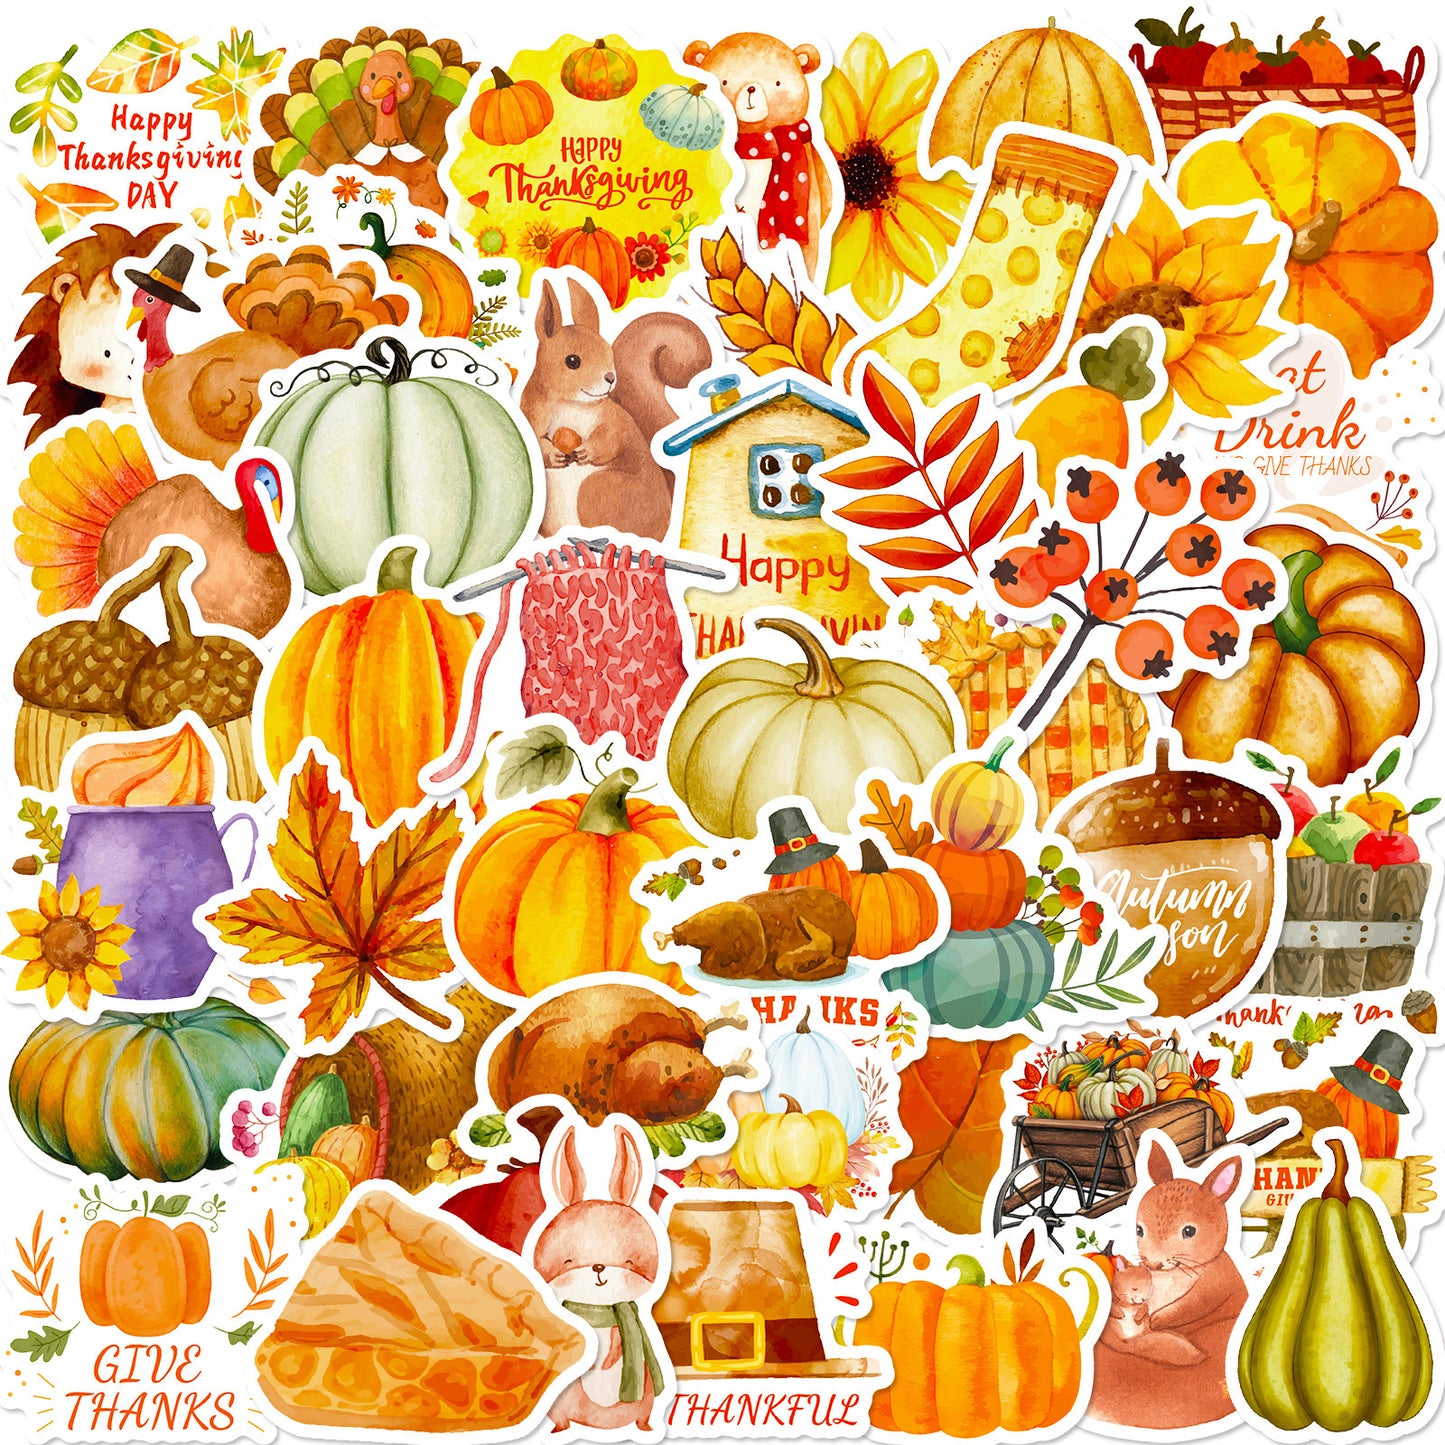 50 Thanksgiving Pictures Stickers